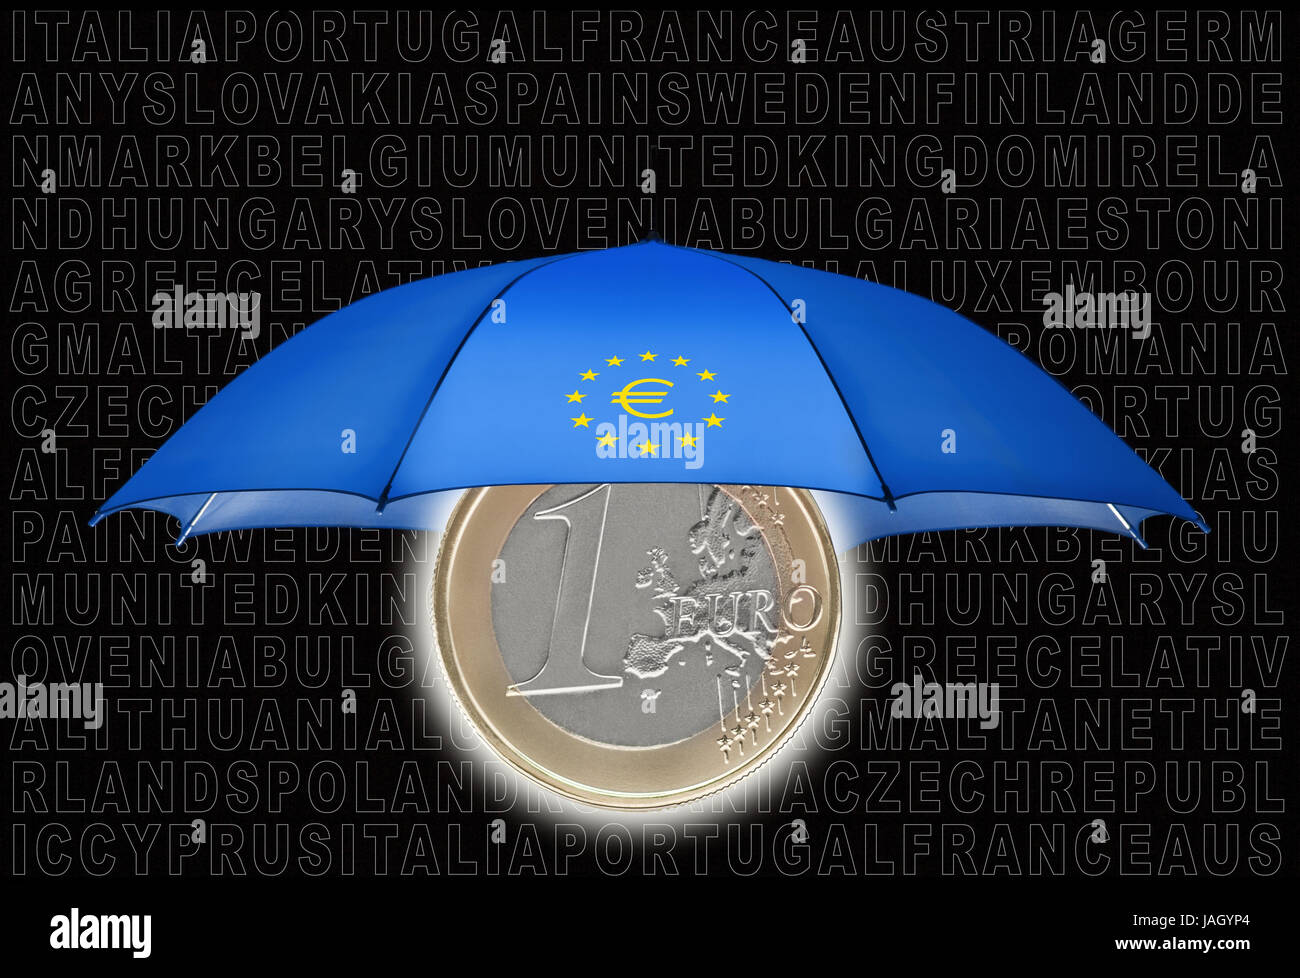 Europrotective display screen,countries,euro,€,coin,monetary coin,currency,money,loss,losing deal,state bankruptcy,national debts,debts,is to blame,protective package,protection,monetary union,Euroland,worldwide economic crisis,European display screen,debt crisis,finances,financial crisis,protective display screen,rescue display screen,letter,computer graphics, Stock Photo